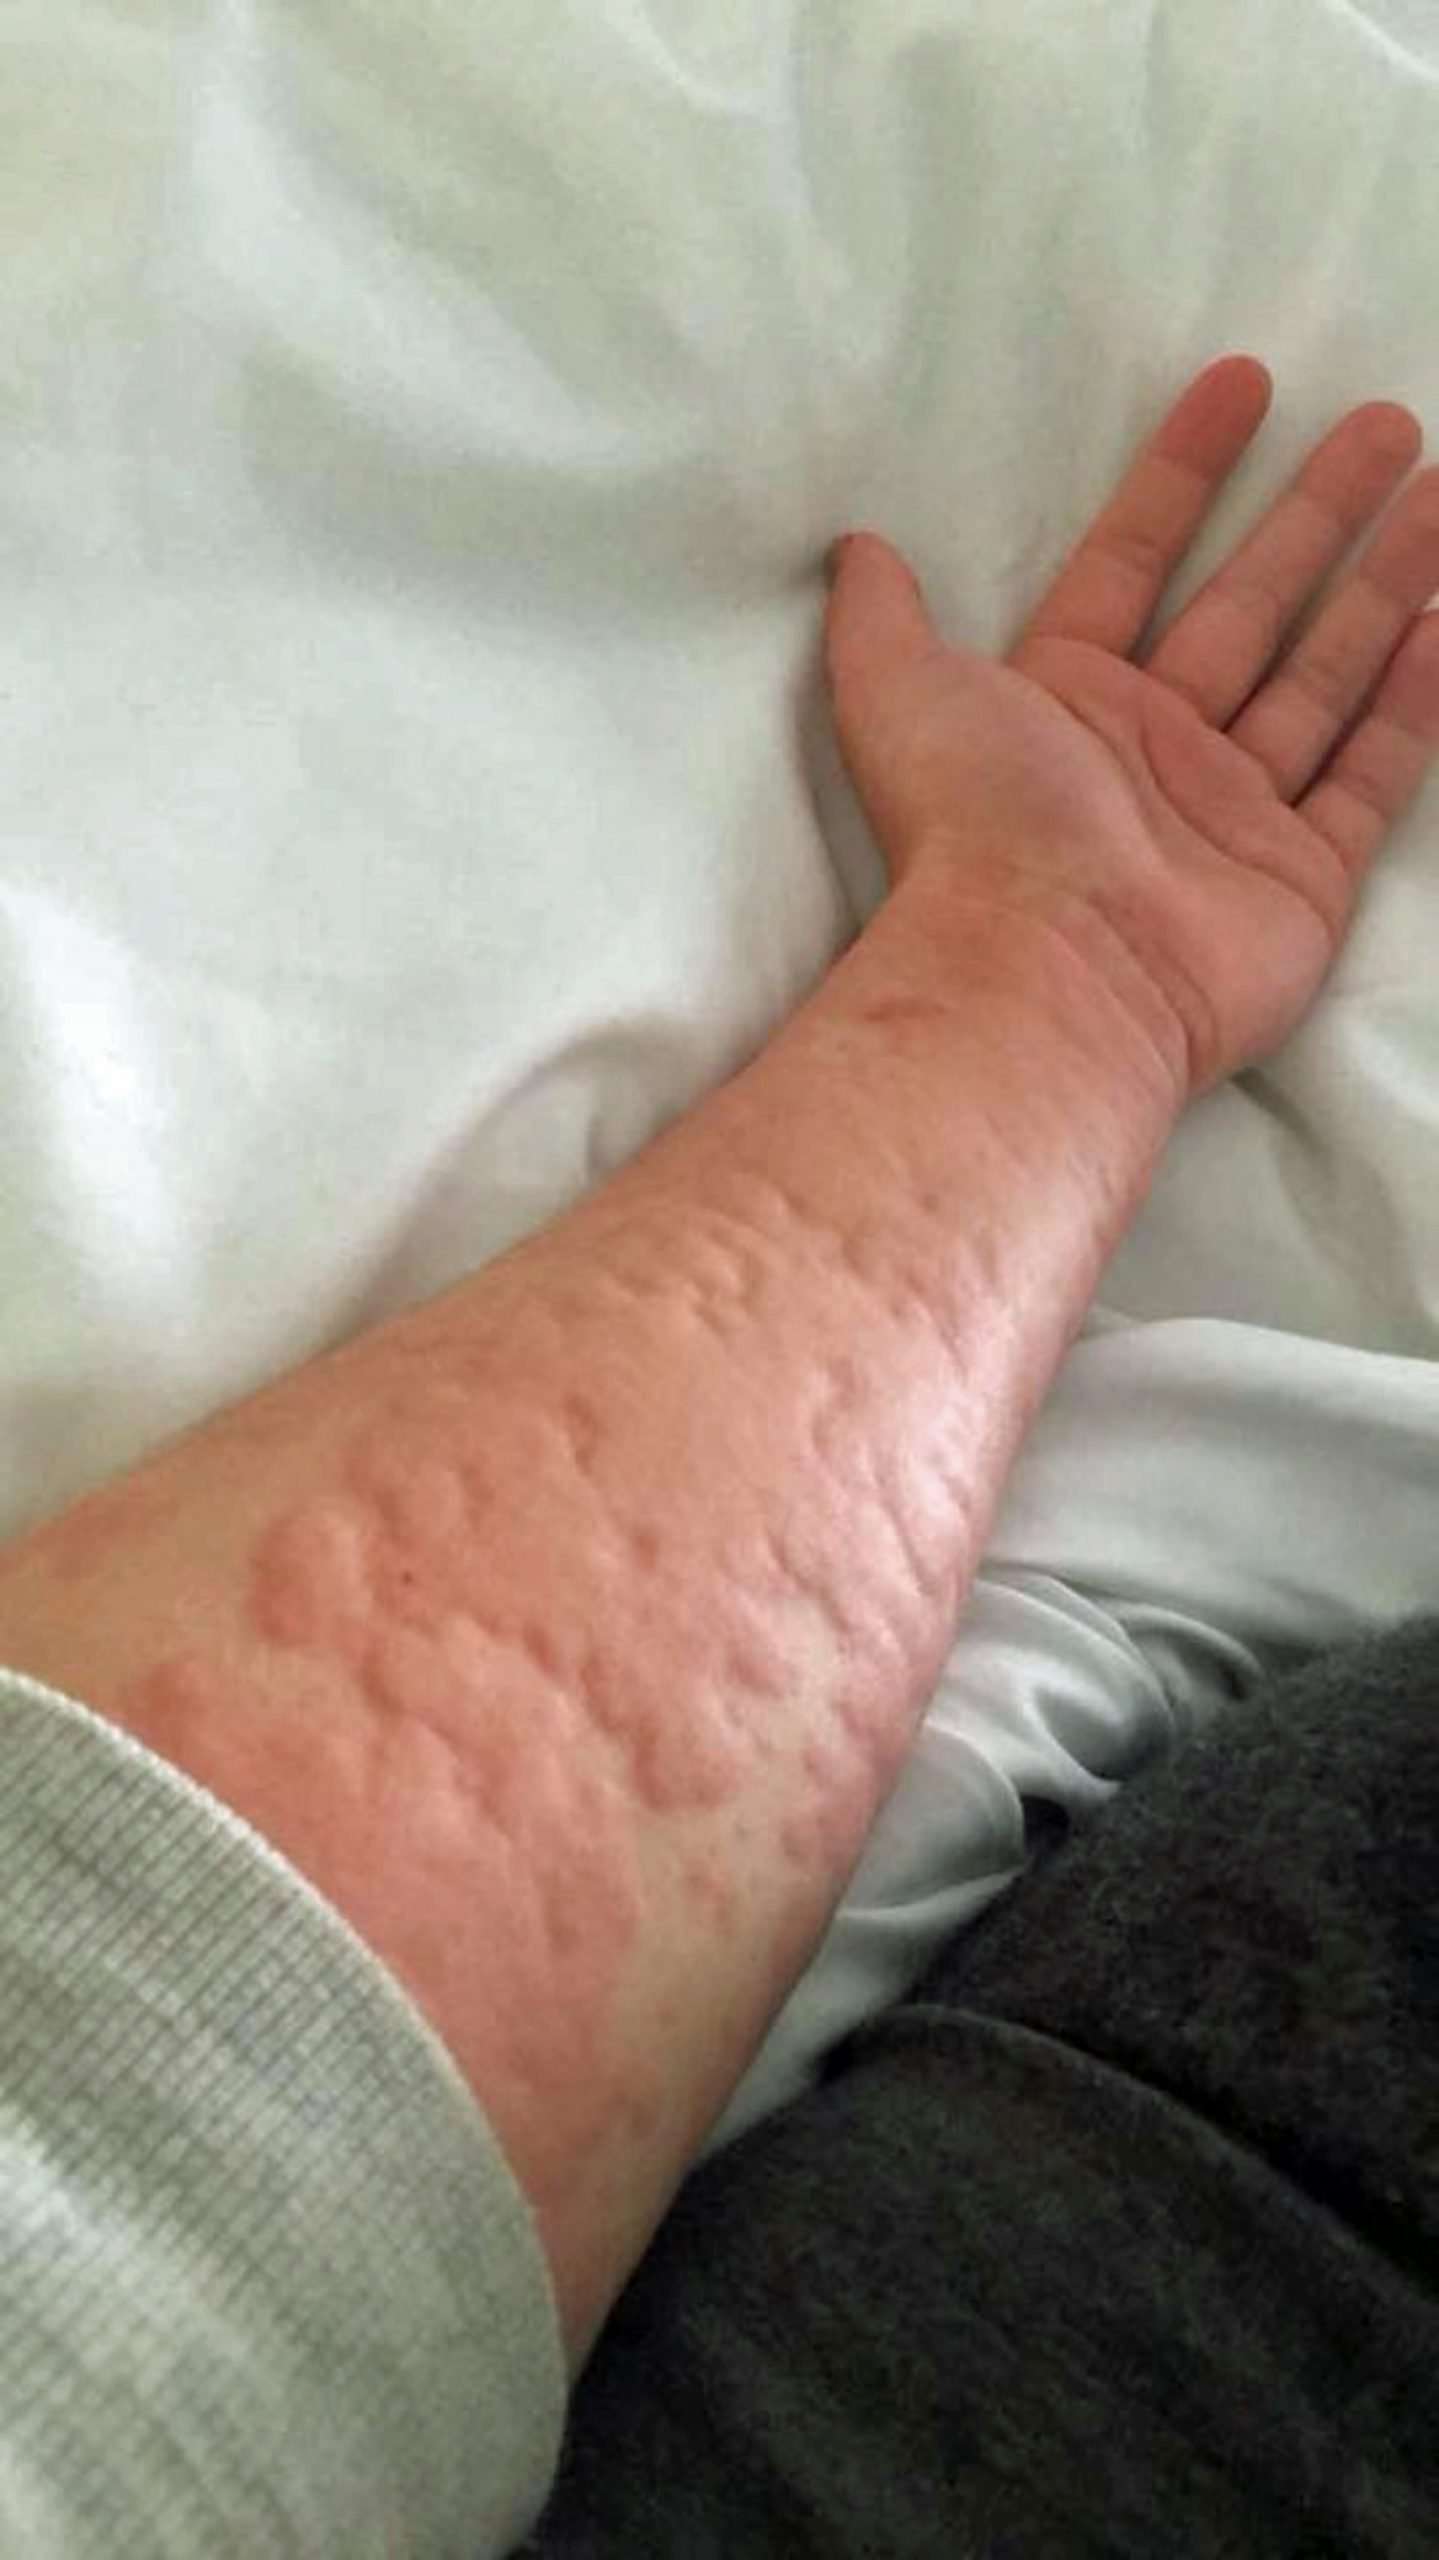 Woman with winter allergy speaks out on condition after ...